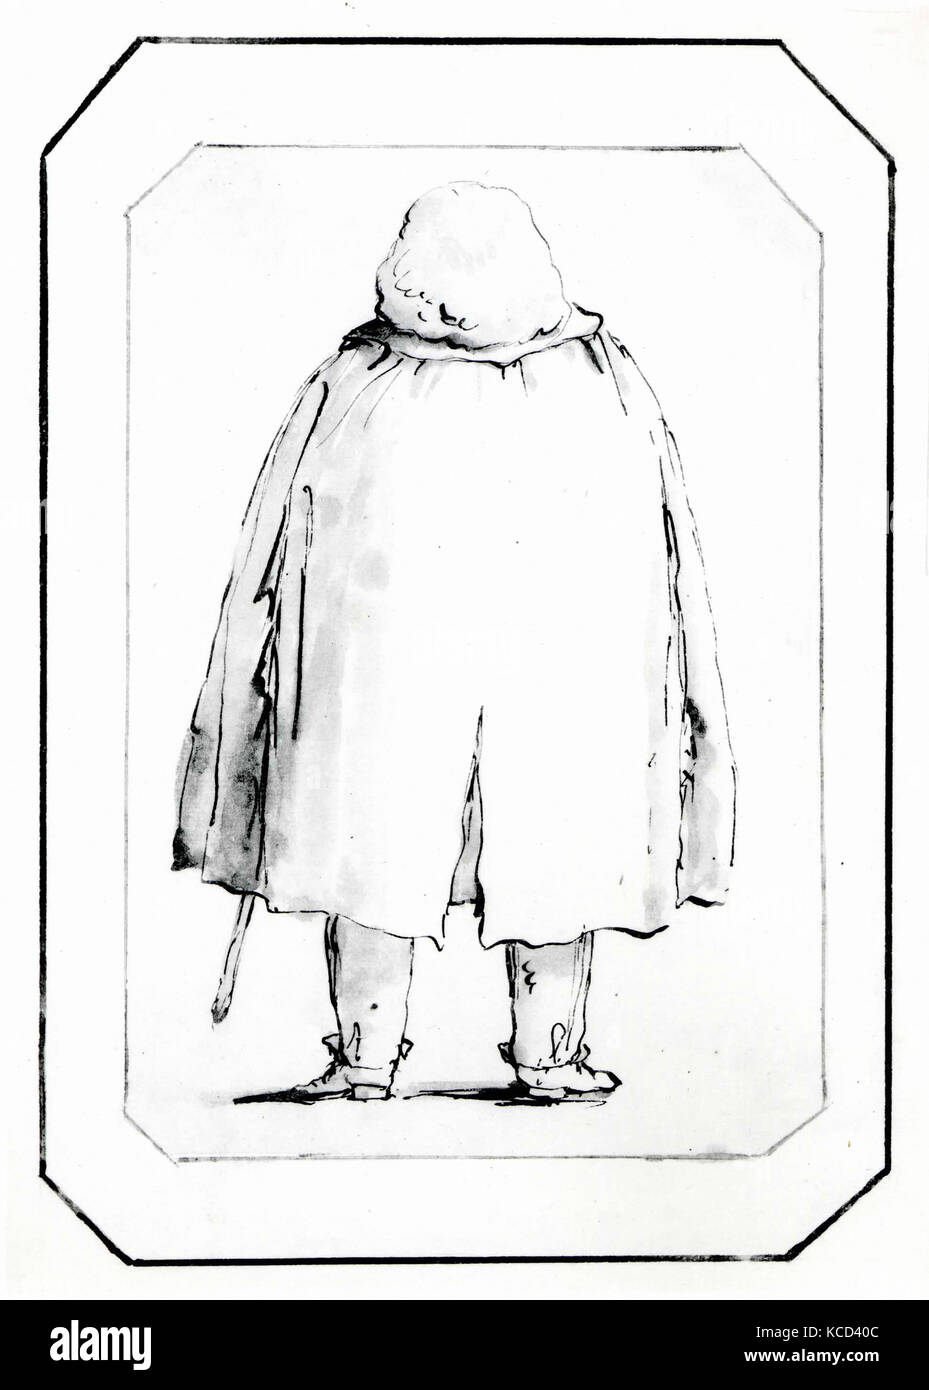 Caricature of a Man in a Voluminous Cloak, Carrying a Walking Stick, Seen from Behind, Giovanni Battista Tiepolo, 1760 Stock Photo